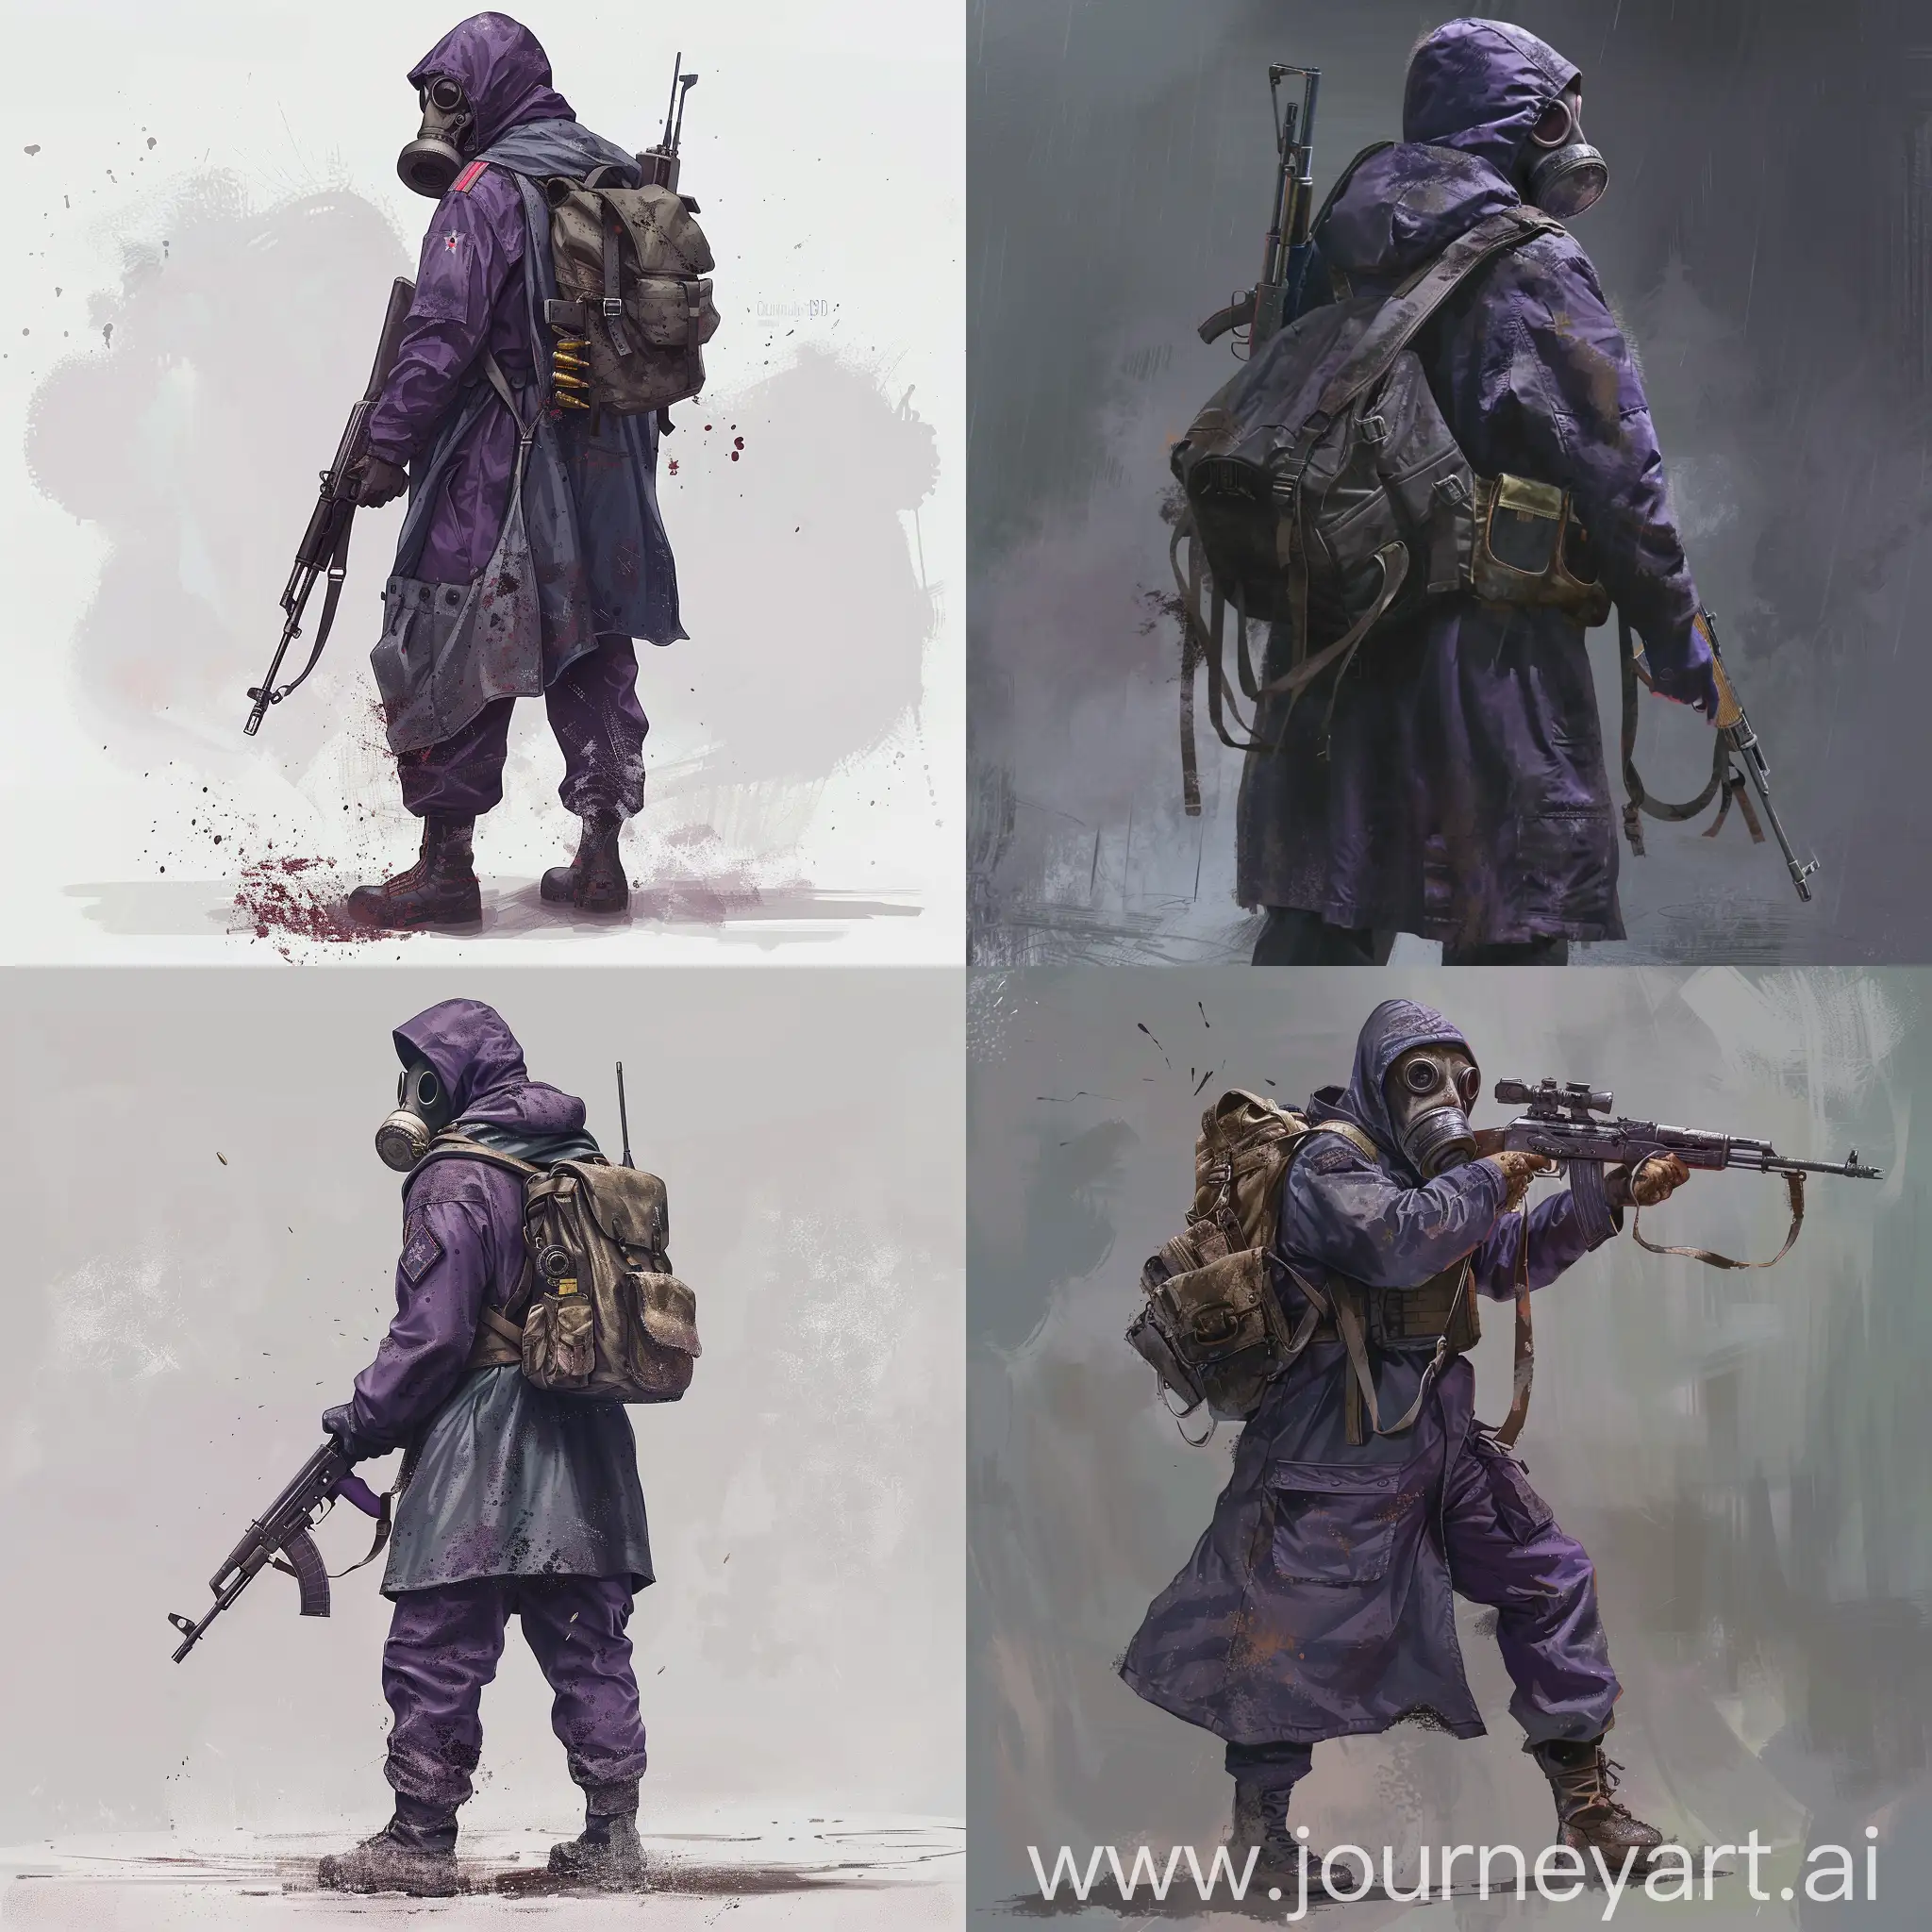 1980s-Soldier-in-Dark-Purple-Military-Jumpsuit-with-Gas-Mask-and-Sniper-Rifle